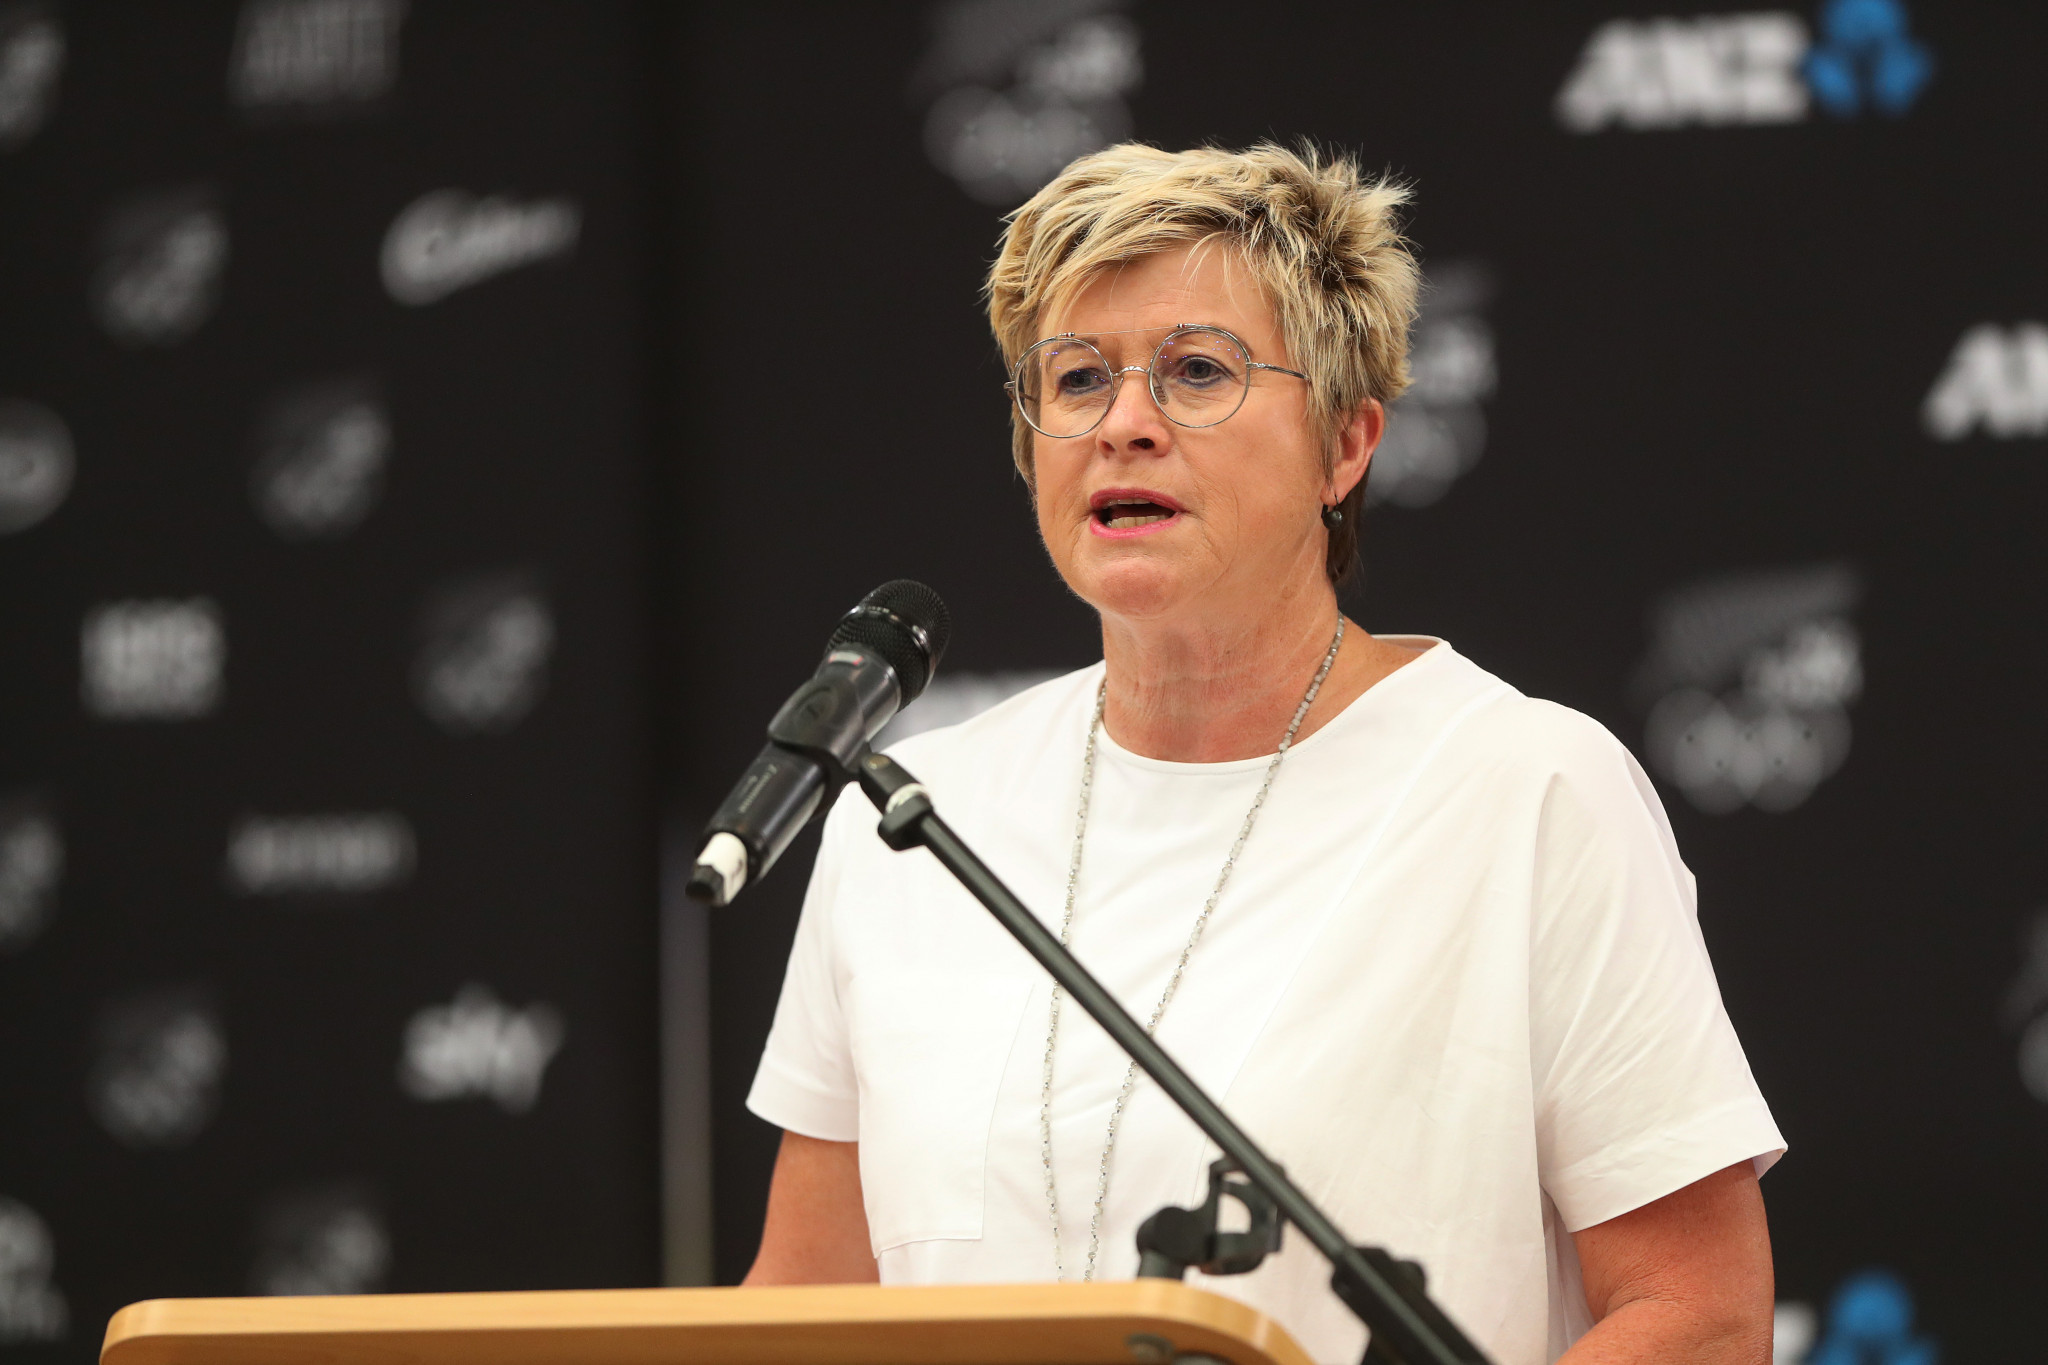 Kereyn Smith is reportedly poised to join Cycling New Zealand after ending her spell as chief executive and secretary general of the New Zealand Olympic Committee ©Getty Images